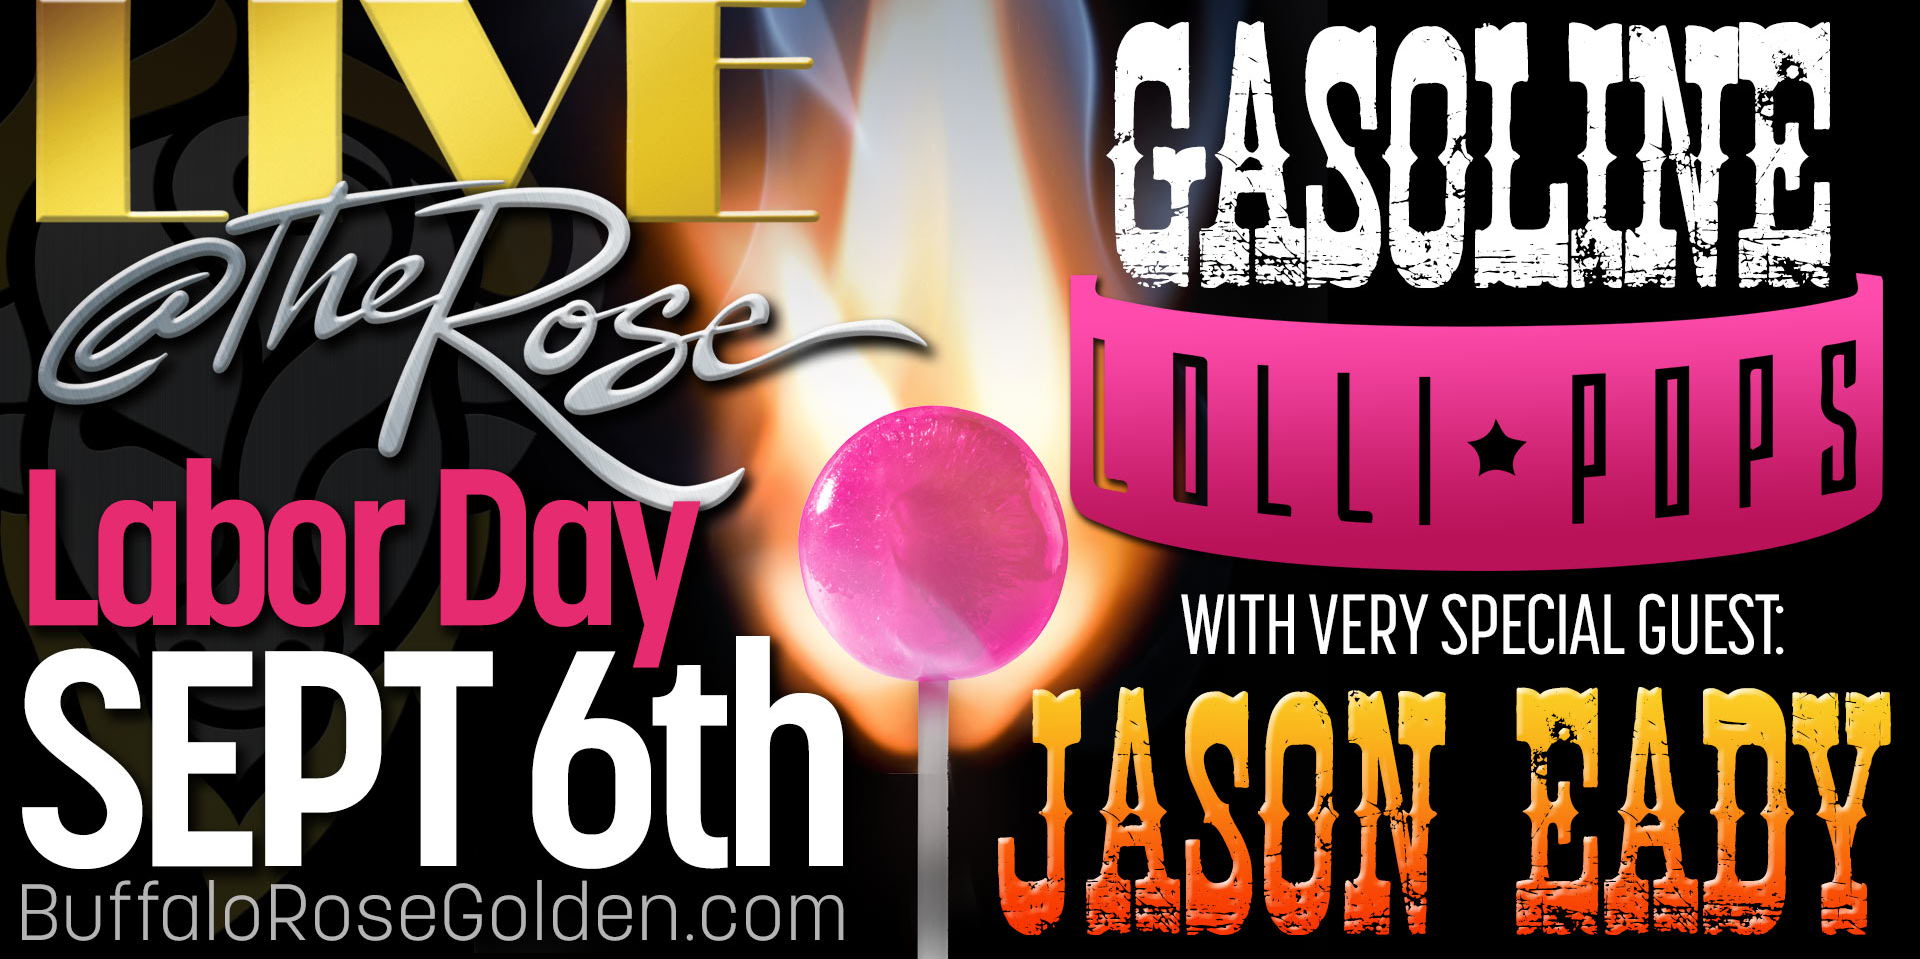 Gasoline Lollipops with very special guest Jason Eady promotional image